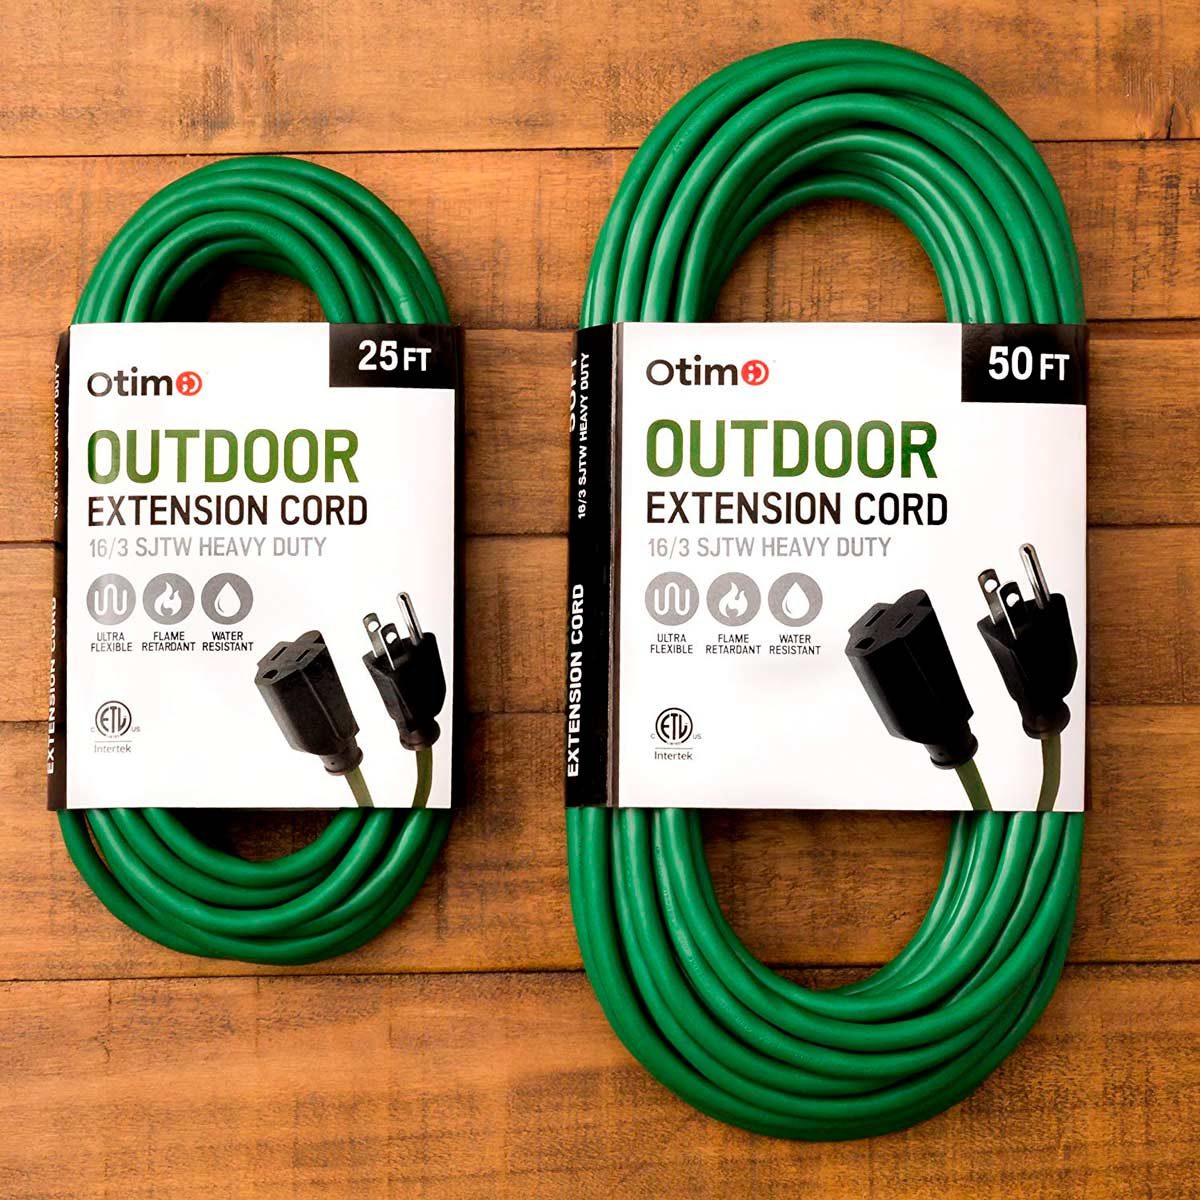 The Best Extension Cords For Outdoor Christmas Light Displays